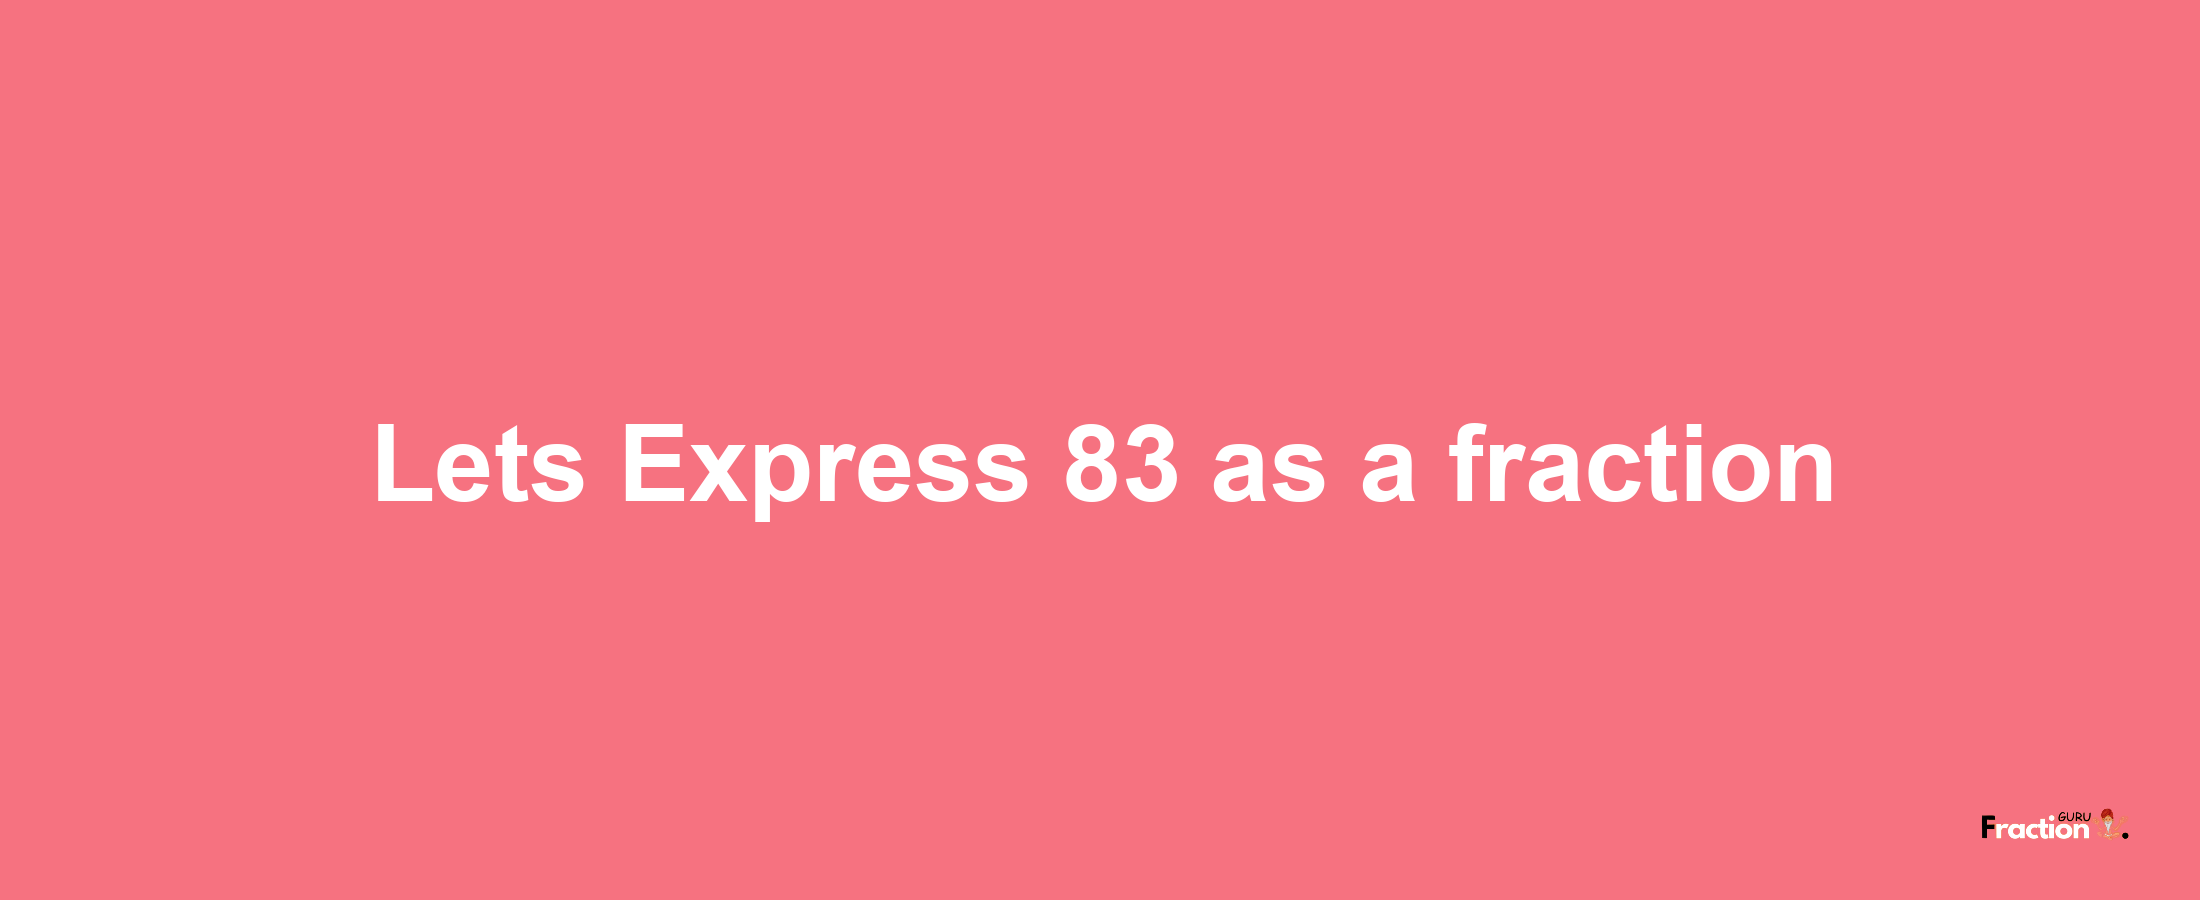 Lets Express 83 as afraction